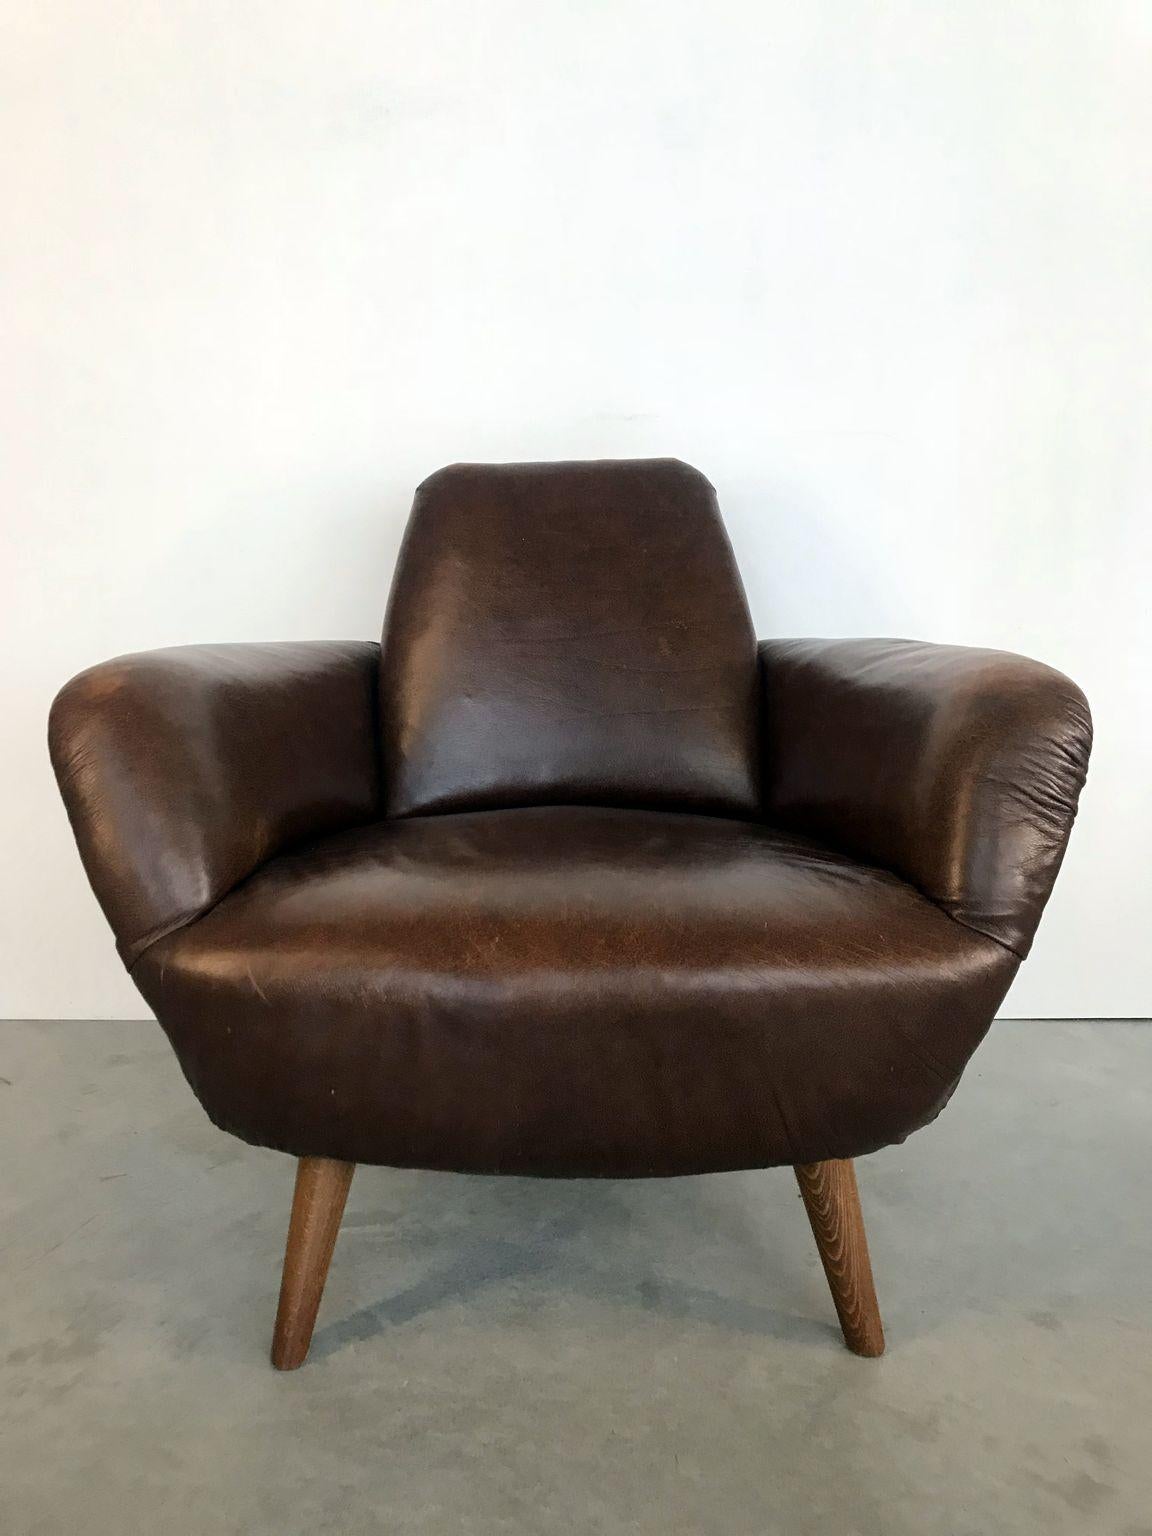 Serbian Midcentury Leather Armchair For Sale